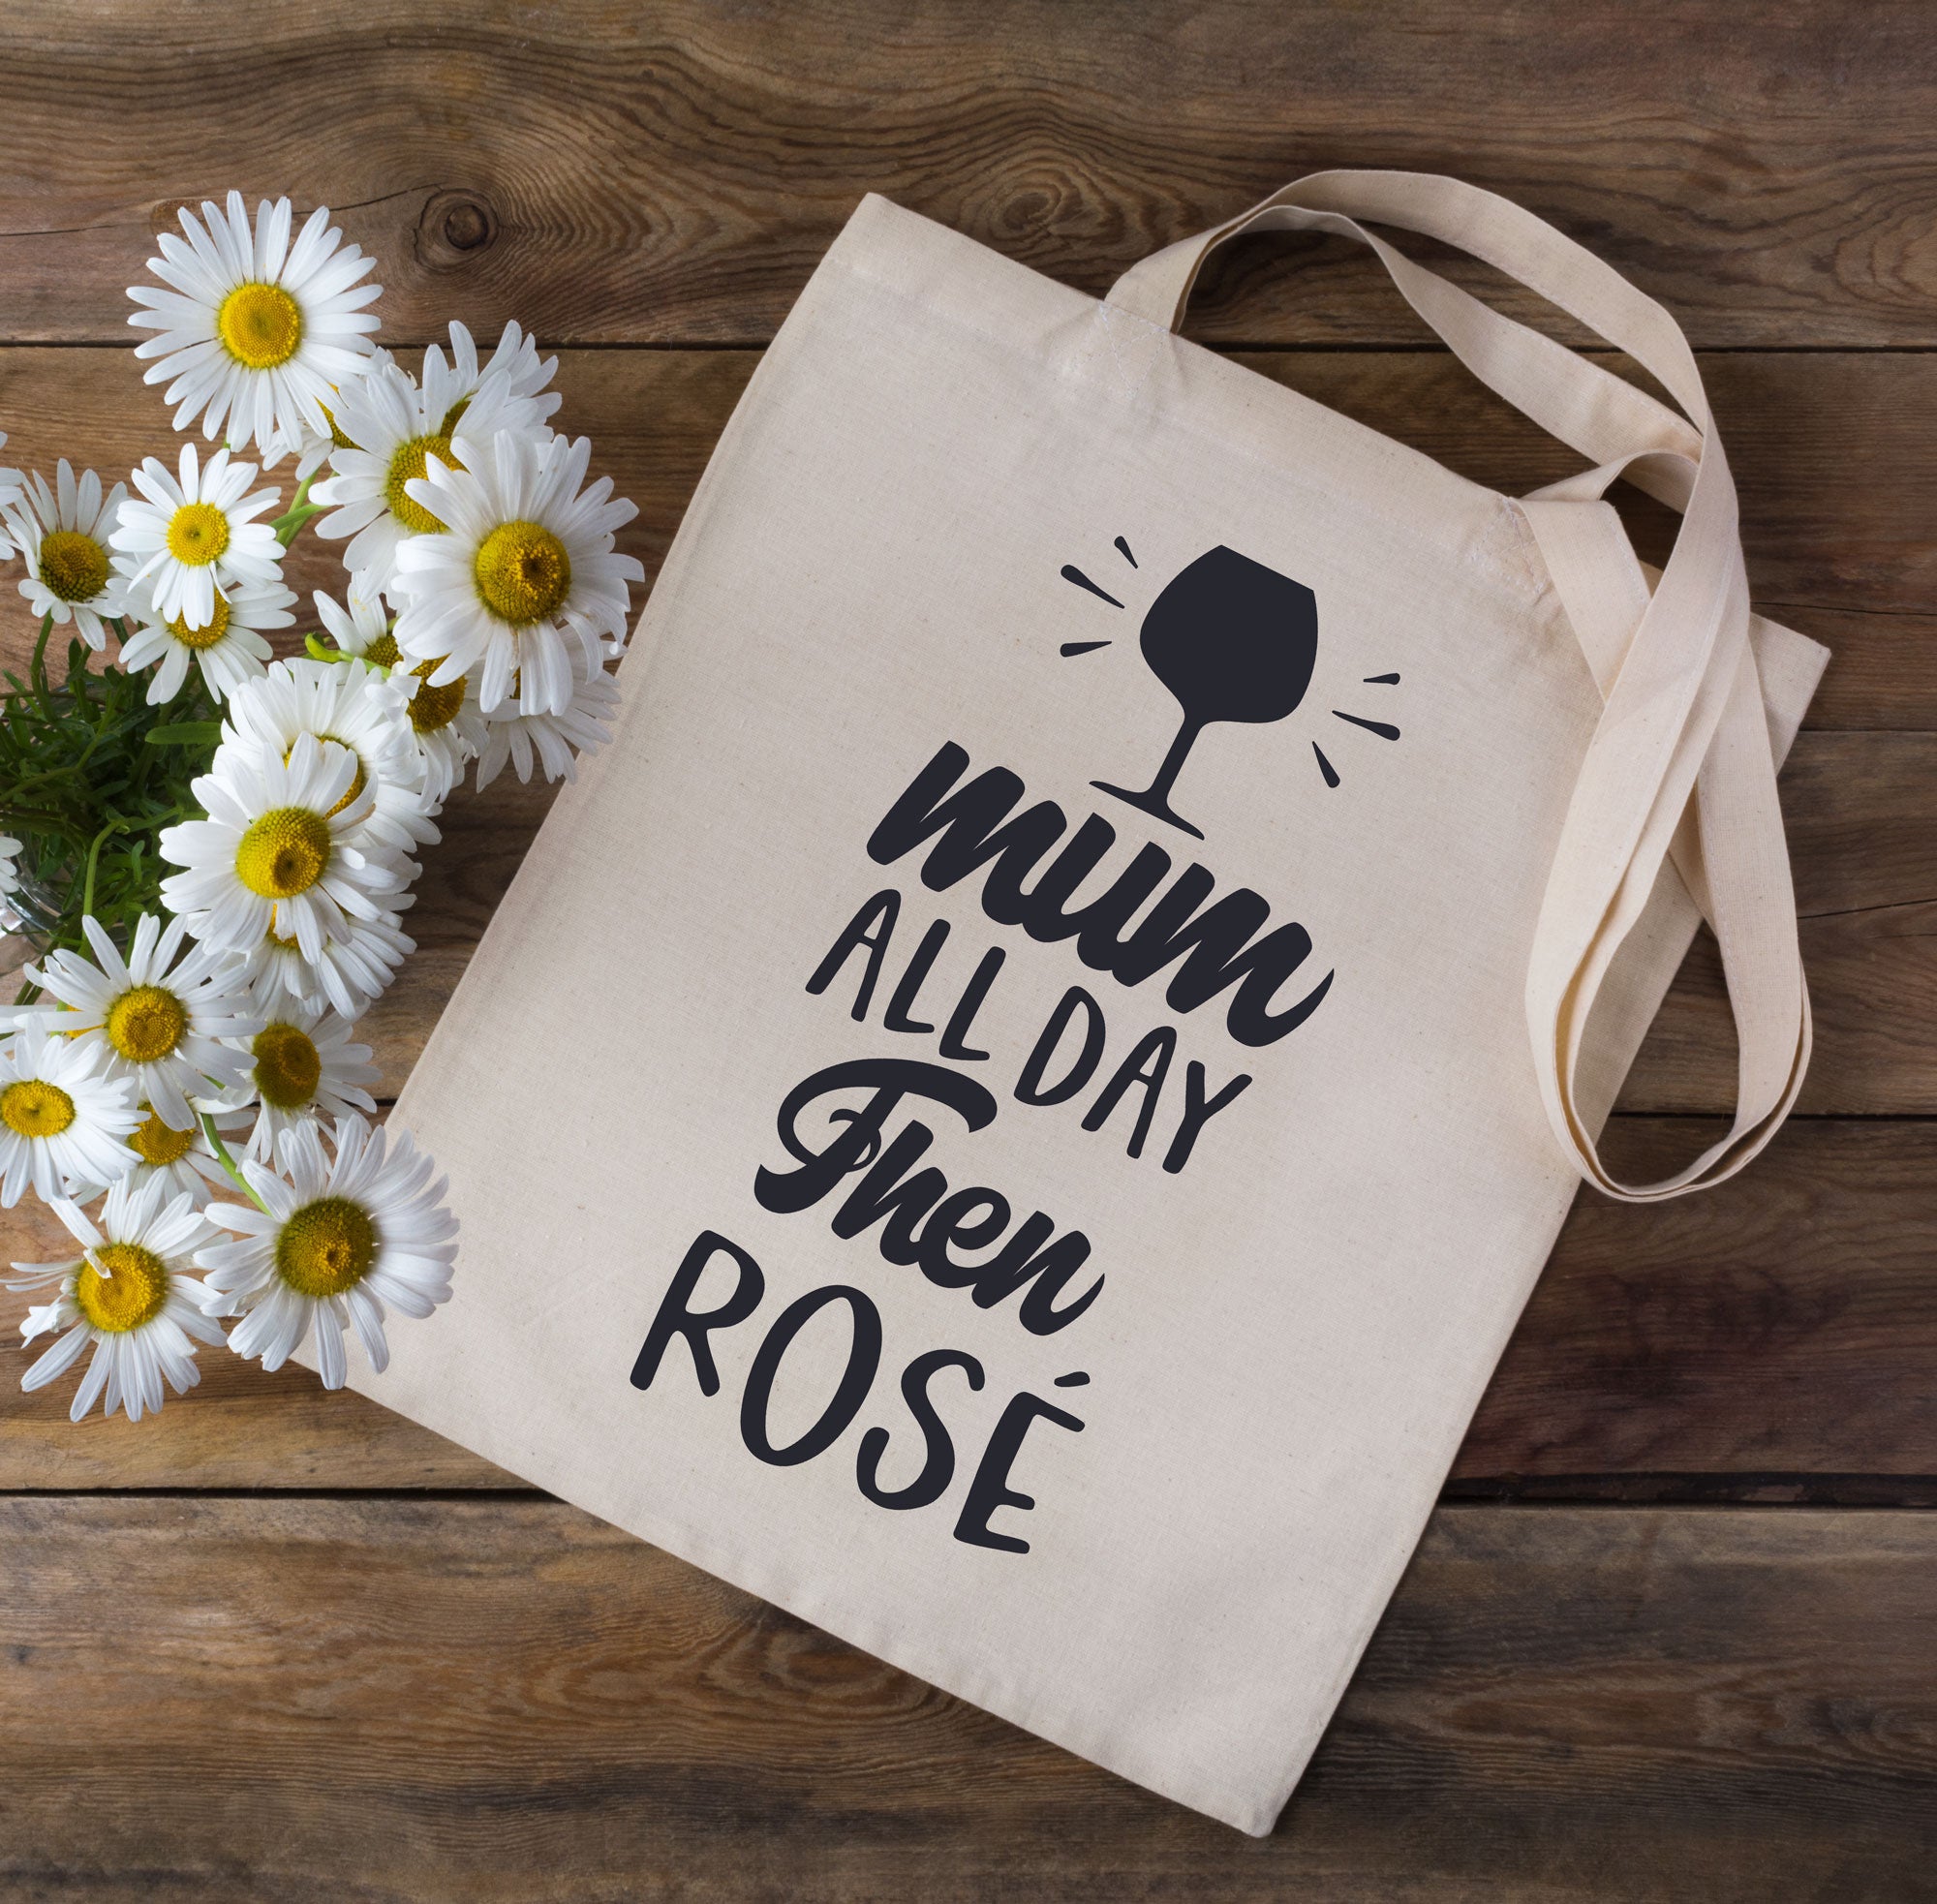 Mum All Day Then Rose Tote Bag